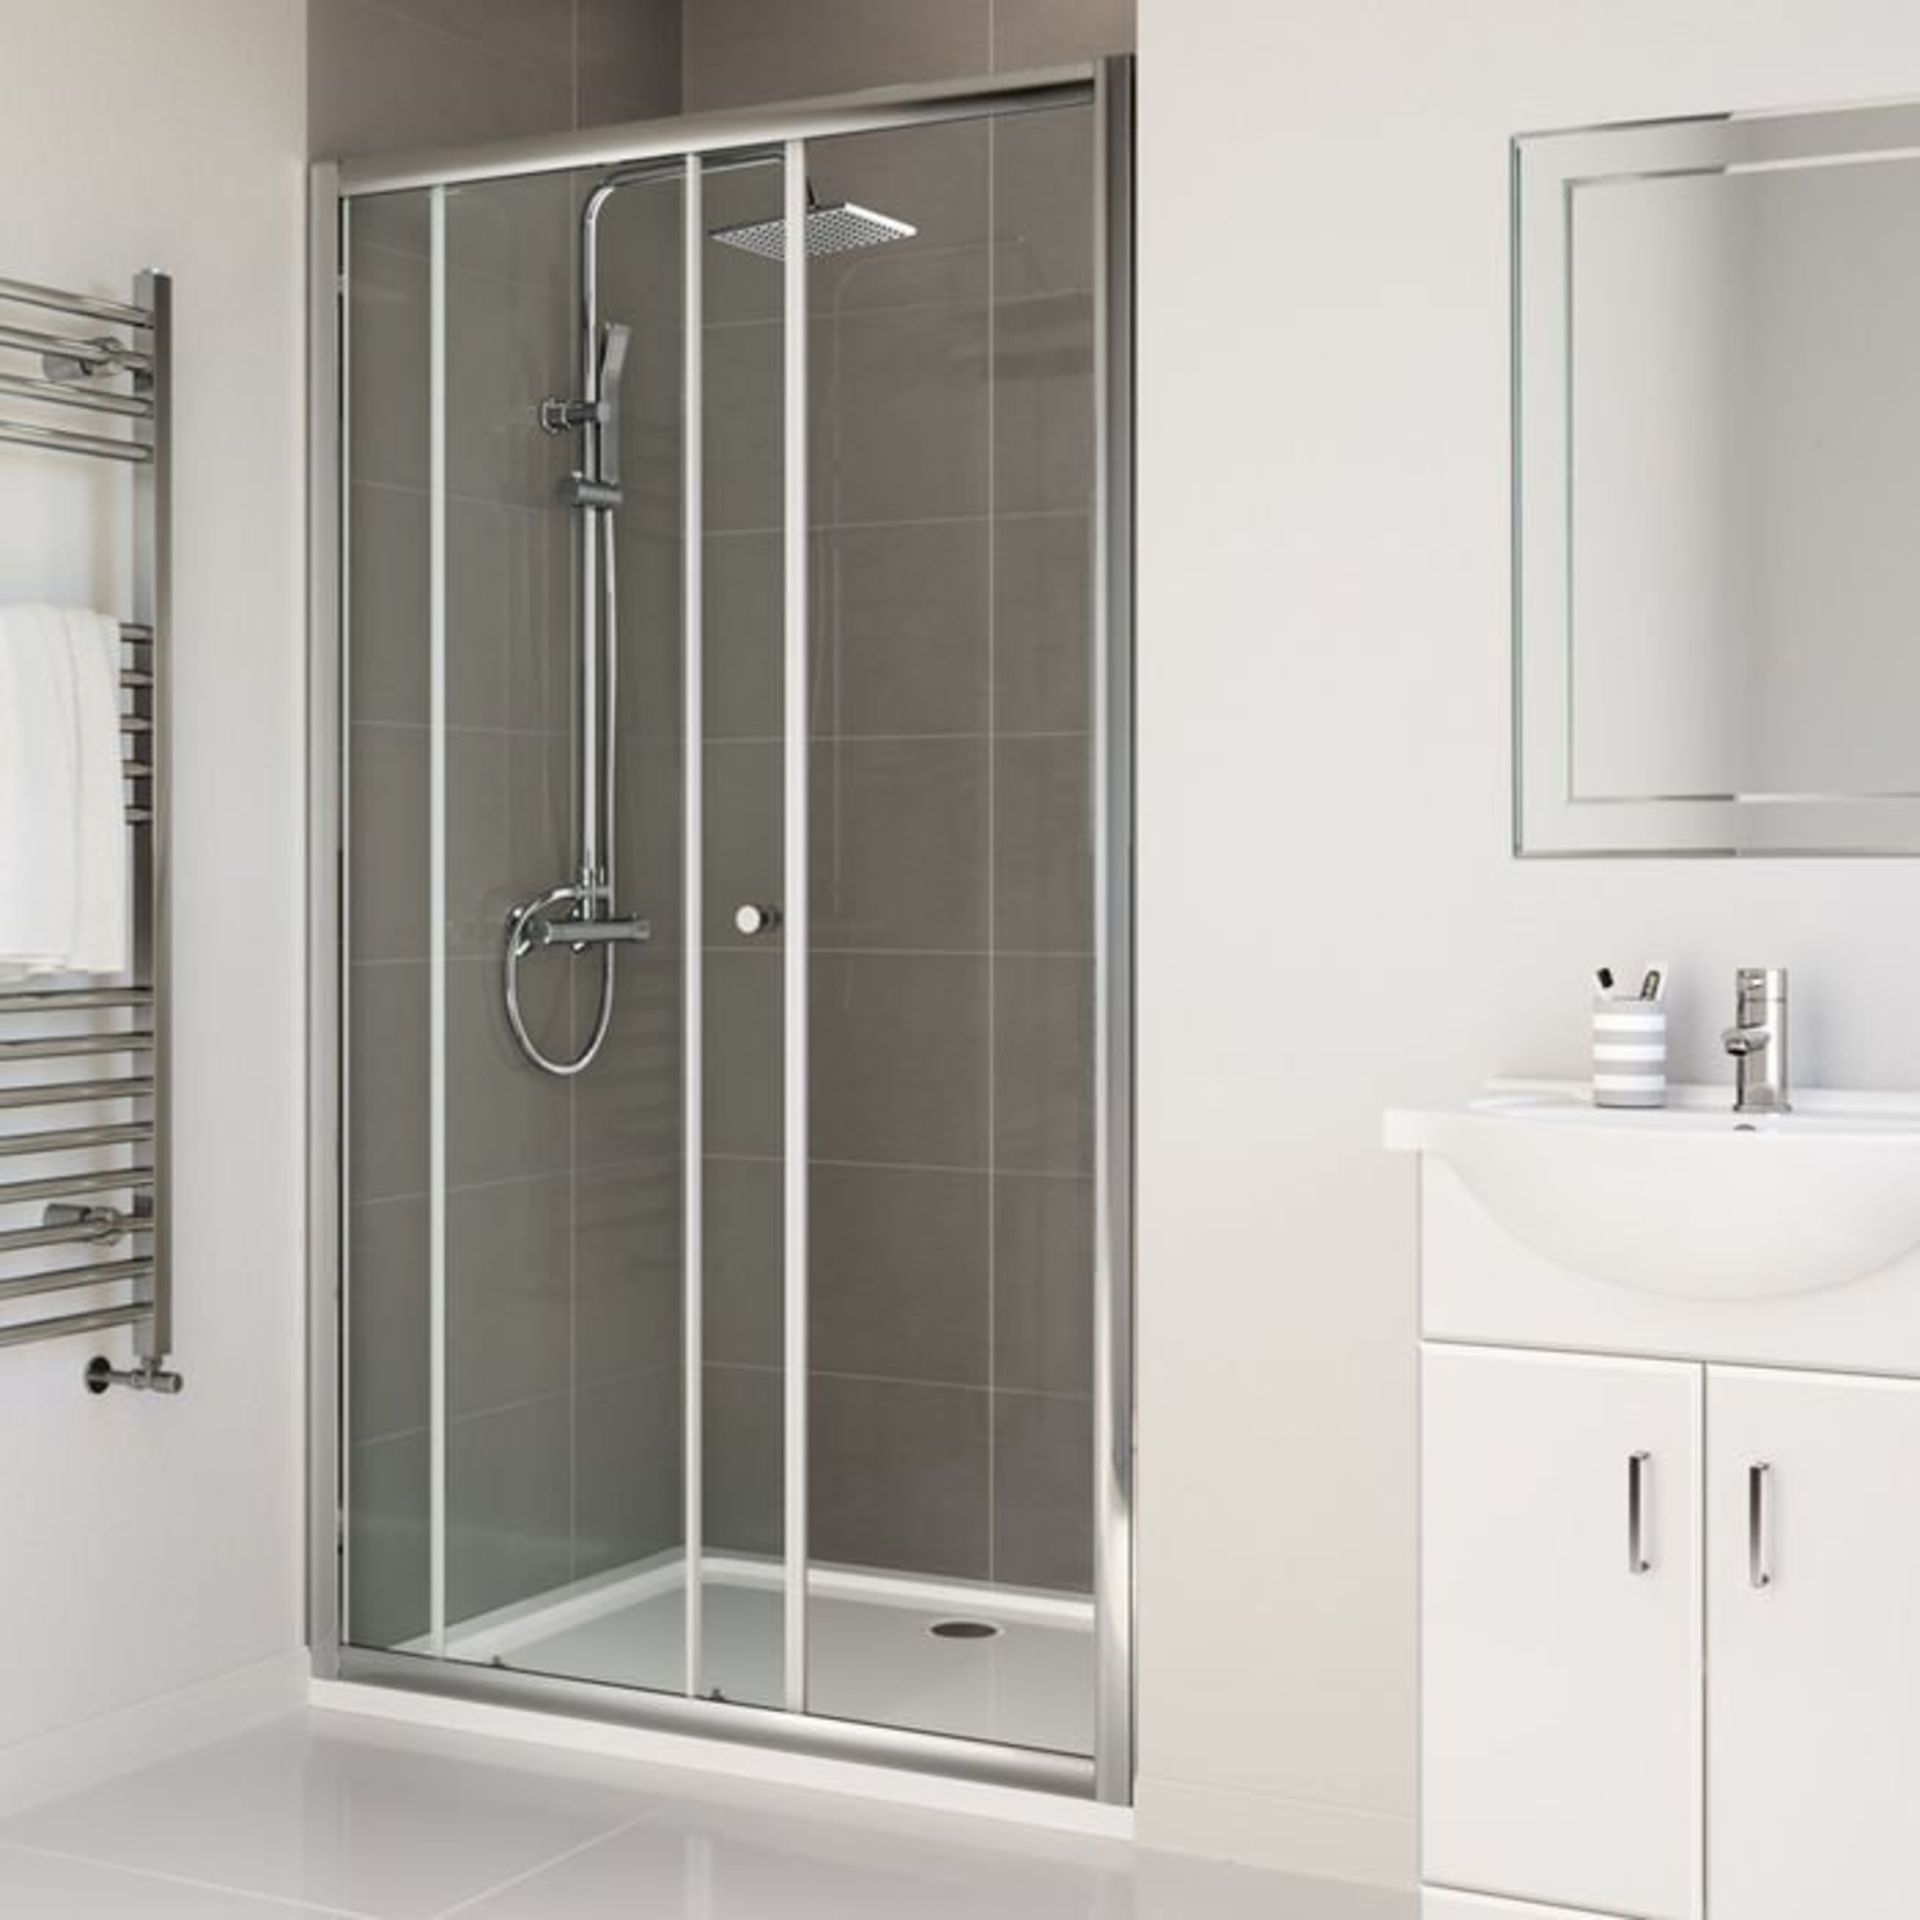 (M29) 1200mm - Elements Sliding Shower Door. RRP £299.99. 4mm Safety Glass Fully waterproof tested - Image 2 of 6